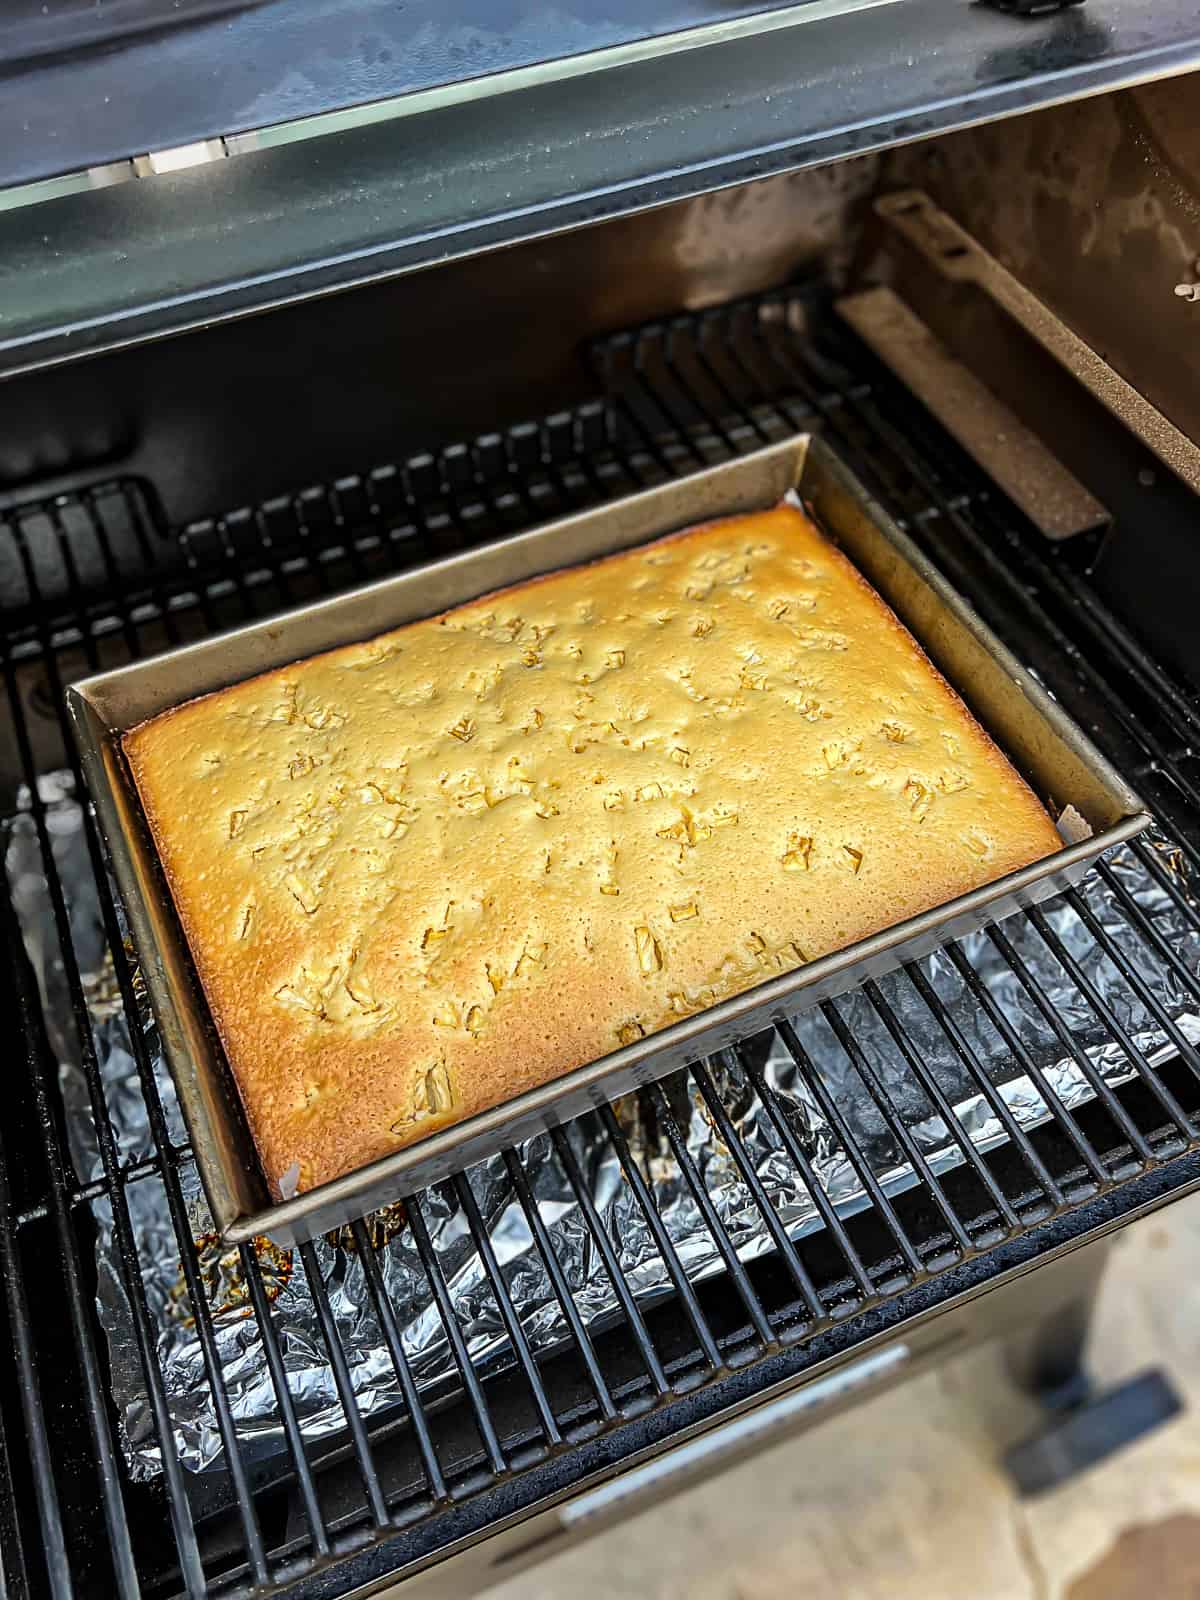 Pineapple cake smoked in the Traeger pellet grills sheet cake style